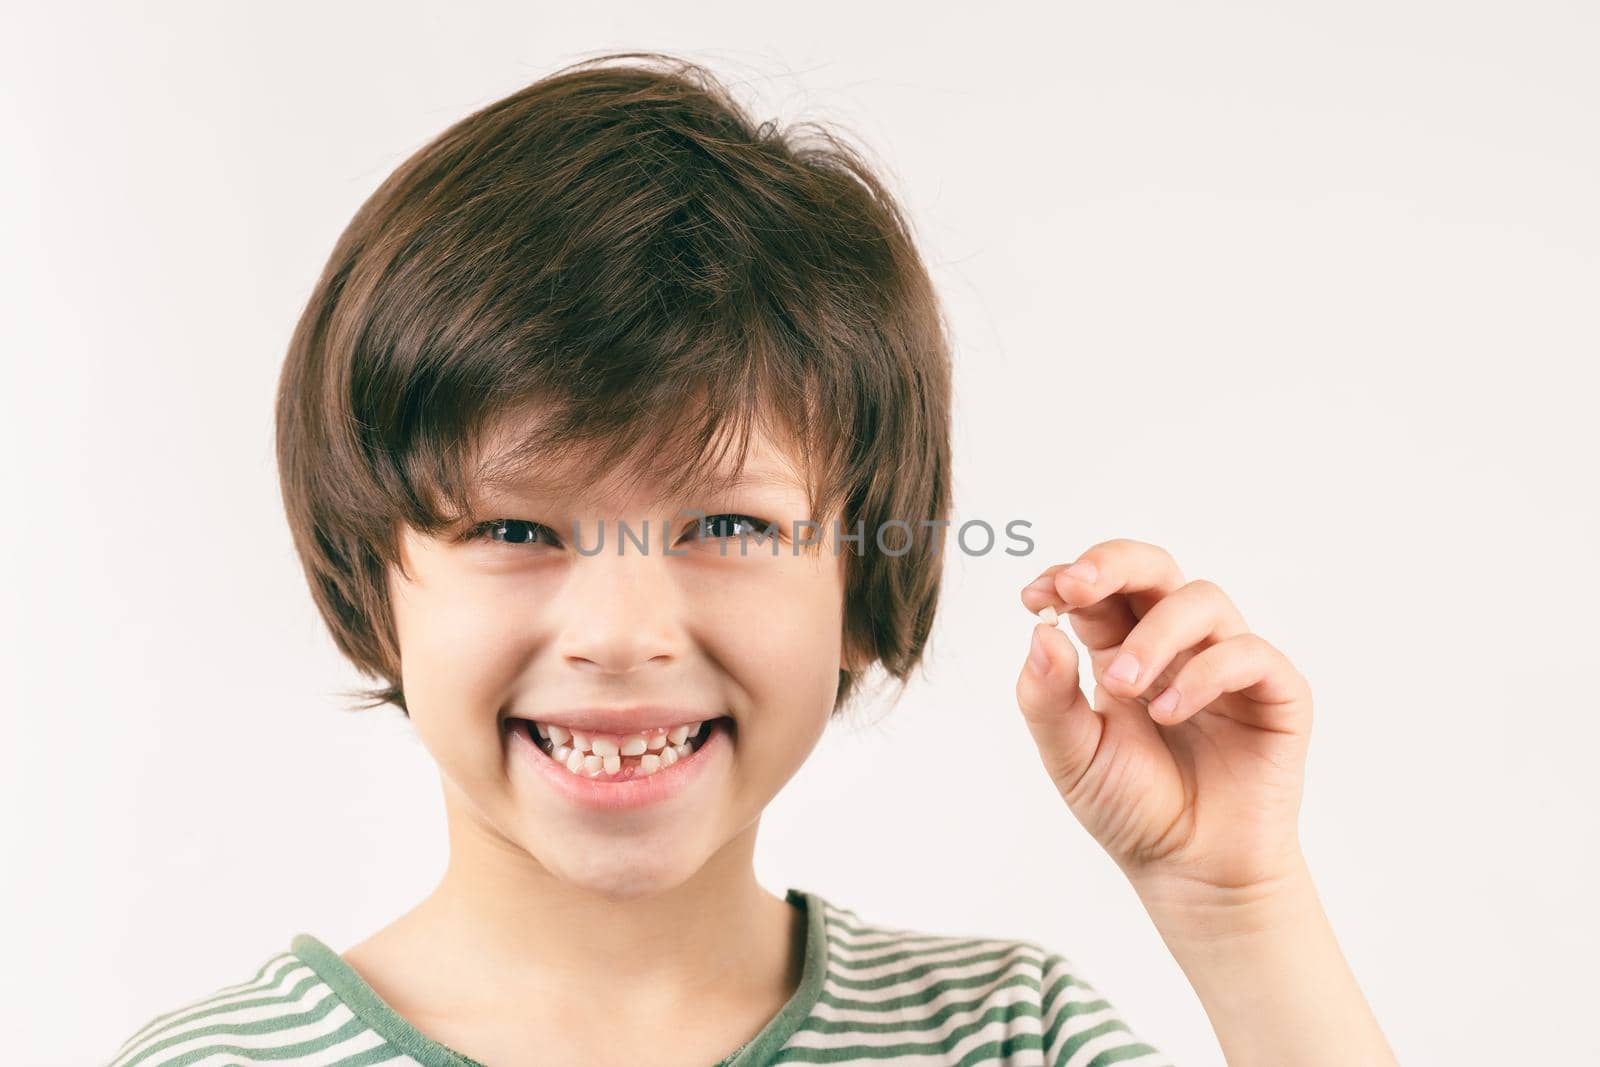 Young toothless boy demonstrates his first lost bottom front milk tooth over grey background. Child dental health care concept. Boy is smiling and looking into the camera